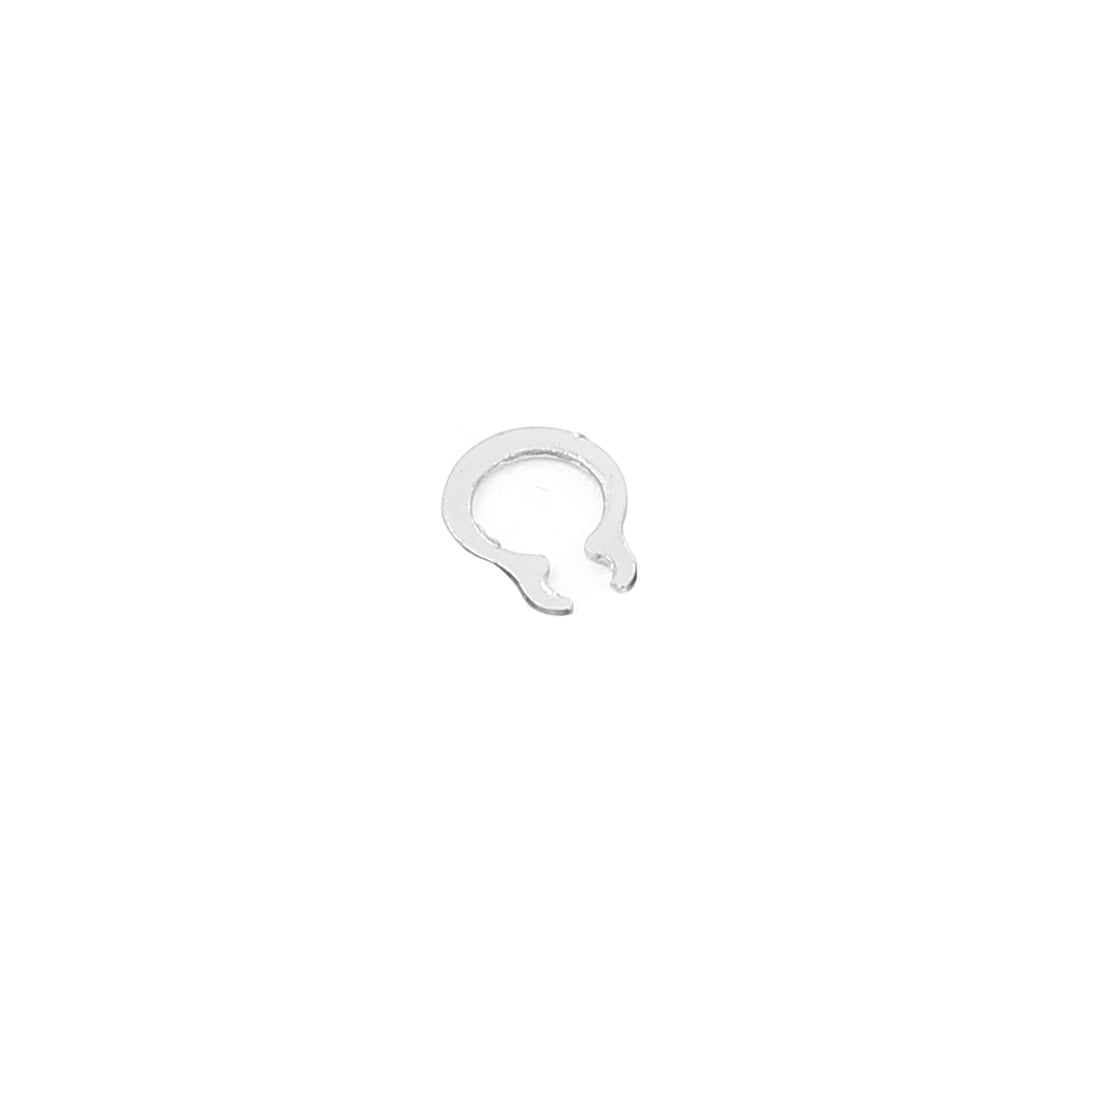 uxcell Plane Retaining Ring C-Clip 10pcs for 3mm Rimfire Motor Shafts